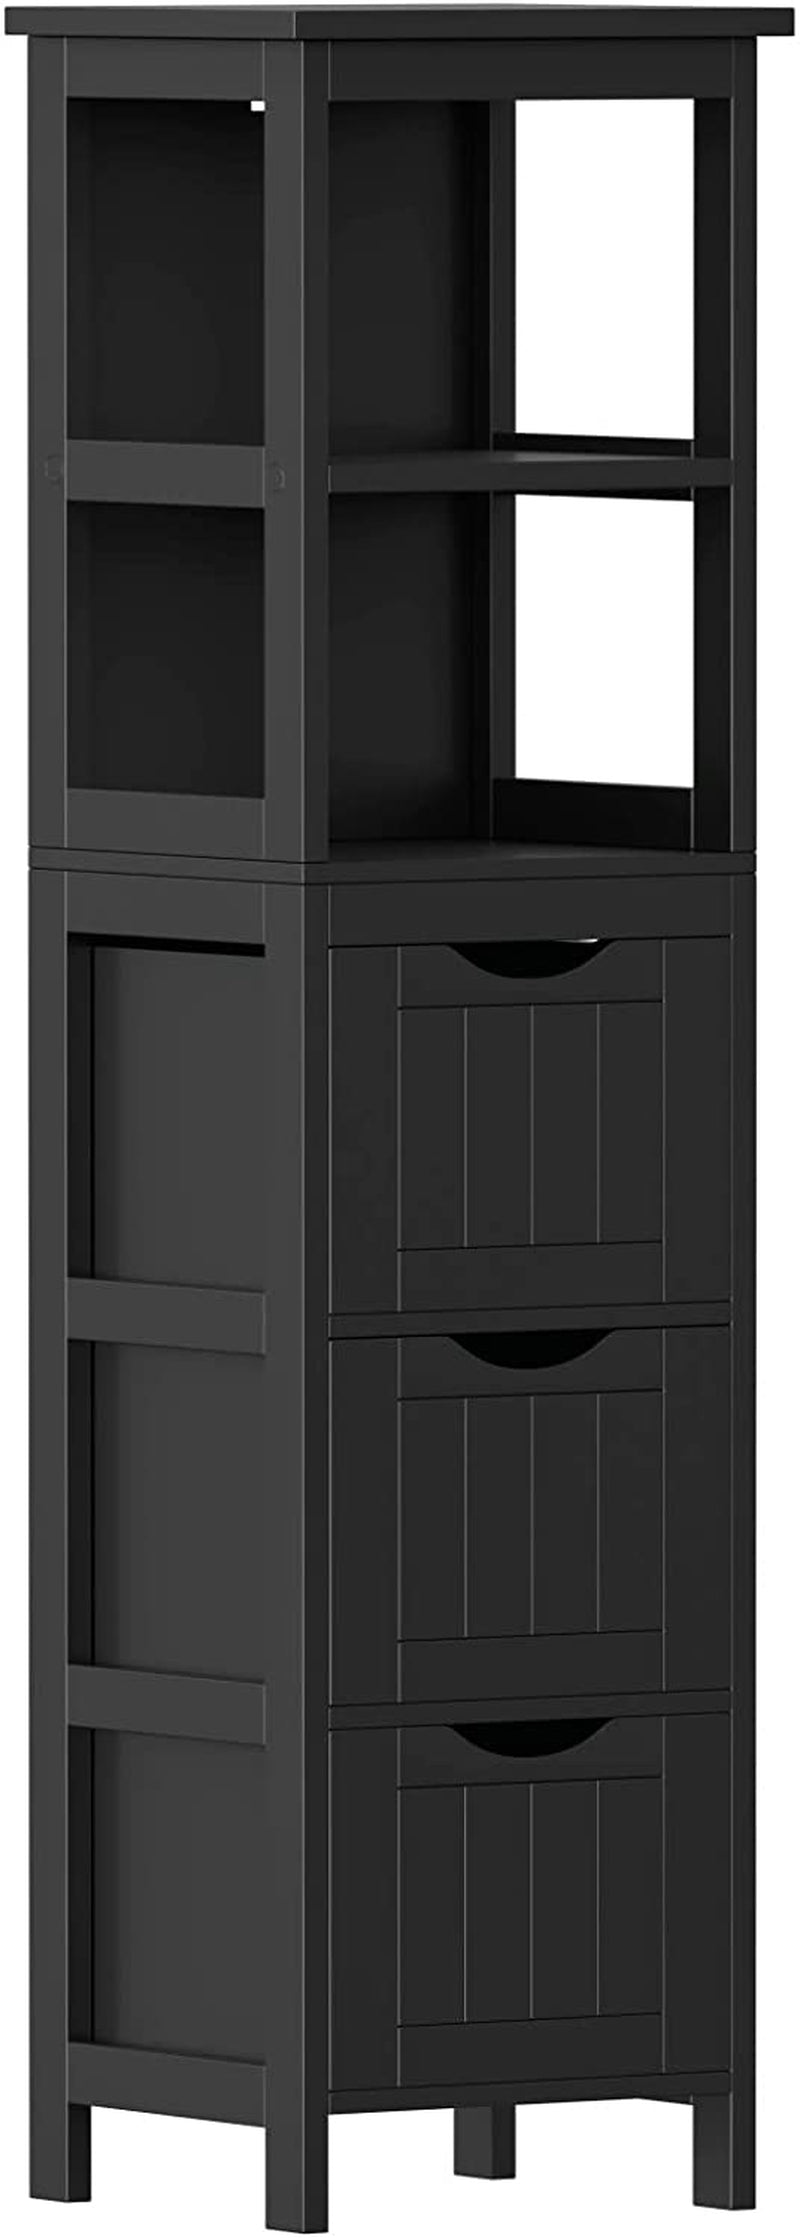 Reettic Narrow Bathroom Storage Cabinet with 3 Removable Drawers, DIY, Free Standing Side Storage Organizer for Bedroom, Living Room, Entryway, 11.8" L X 11.8" W X 35" H, Black BYSG102B Home & Garden > Household Supplies > Storage & Organization Reettic Black 11.8"L x 11.8"W x 56.3"H 